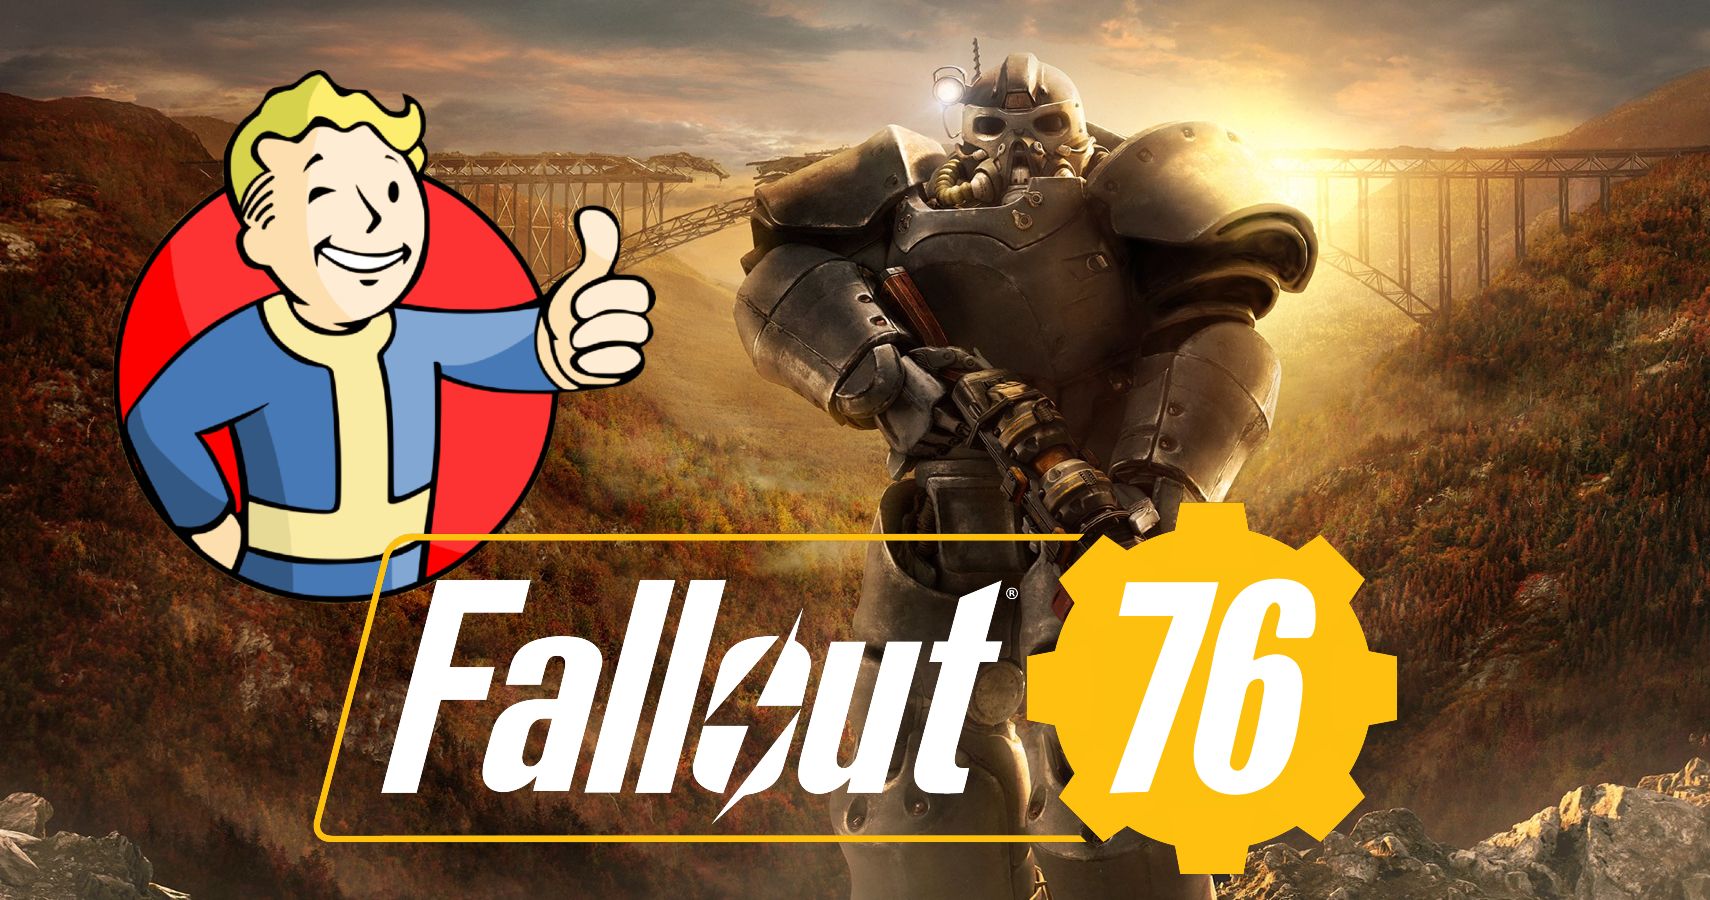 (TheGamer) "After So Many Updates, Is Fallout 76 Worth Playing? The